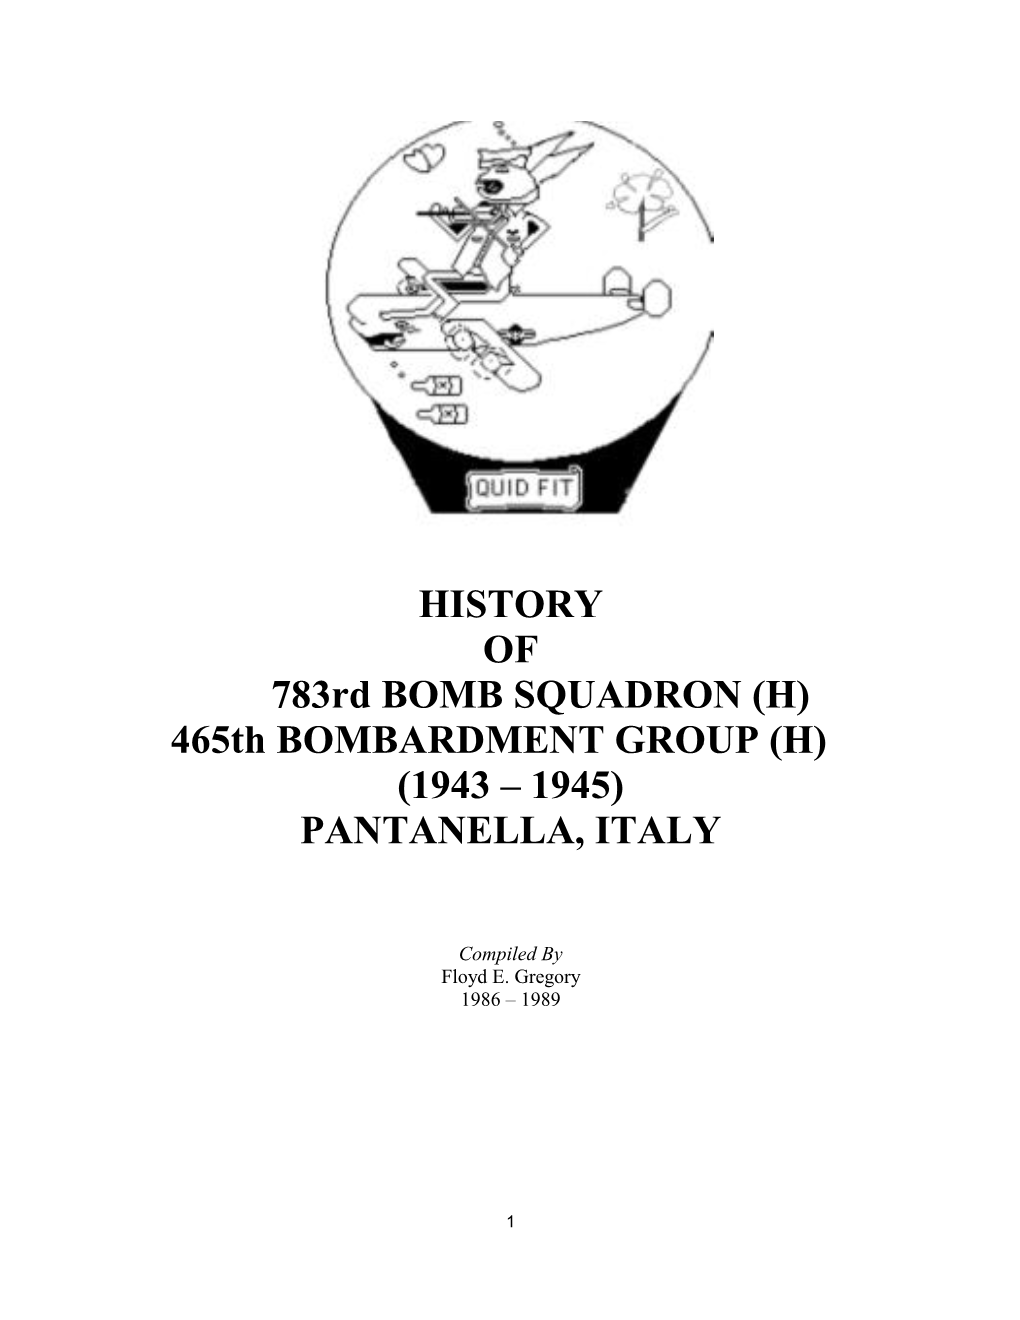 HISTORY of 783Rd BOMB SQUADRON (H) 465Th BOMBARDMENT GROUP (H) (1943 – 1945) PANTANELLA, ITALY